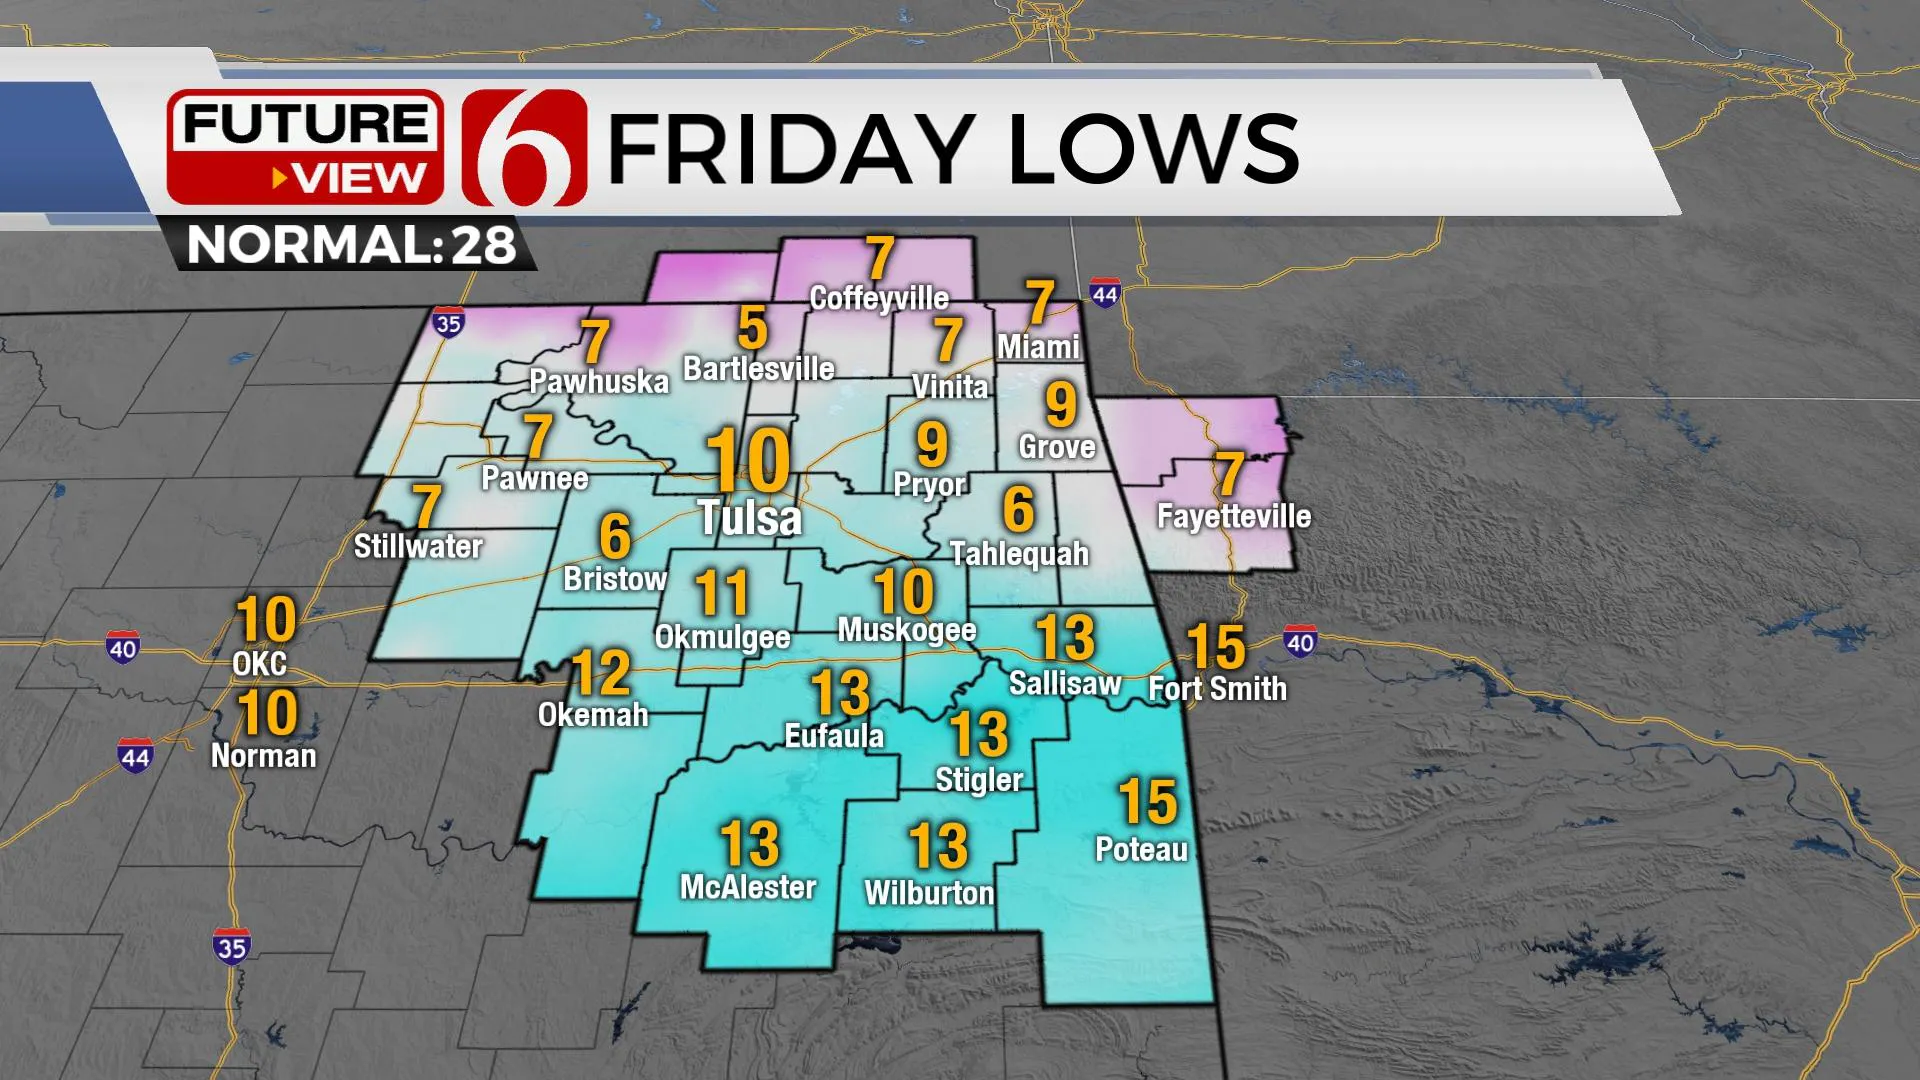 Friday Lows